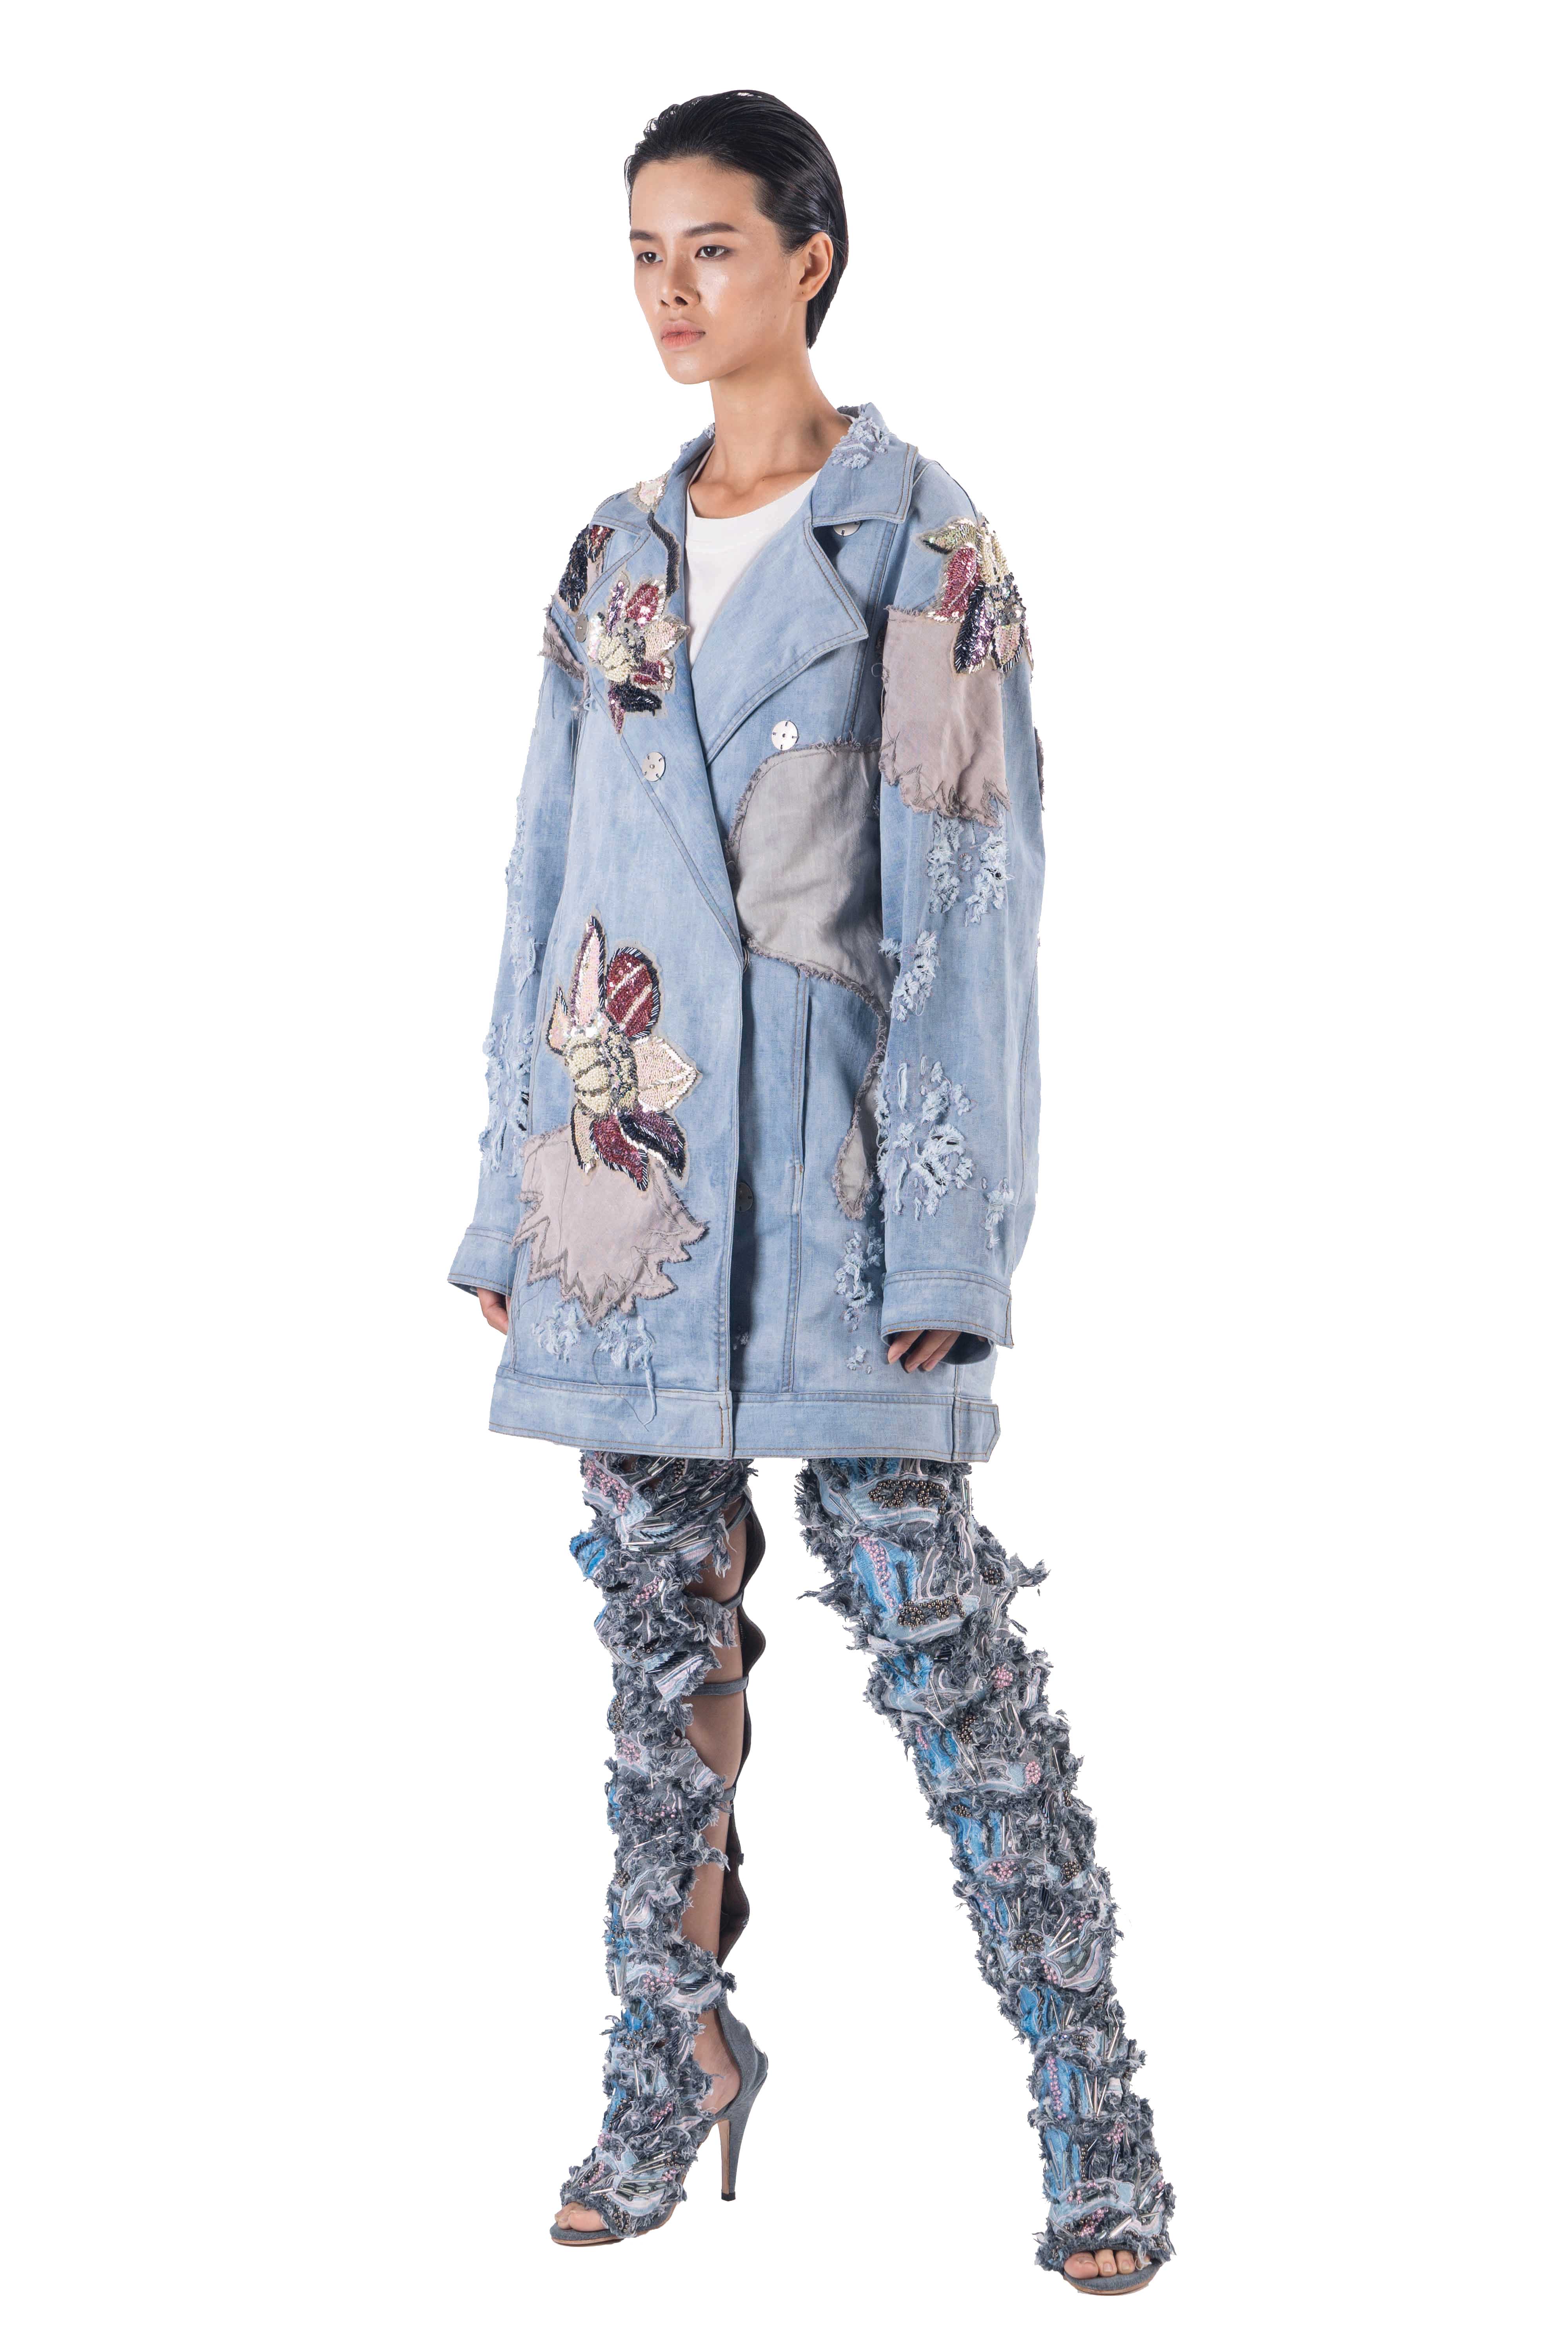 Blue distressed denim long jacket with ripped details, sequined lotus flowers and embellishment